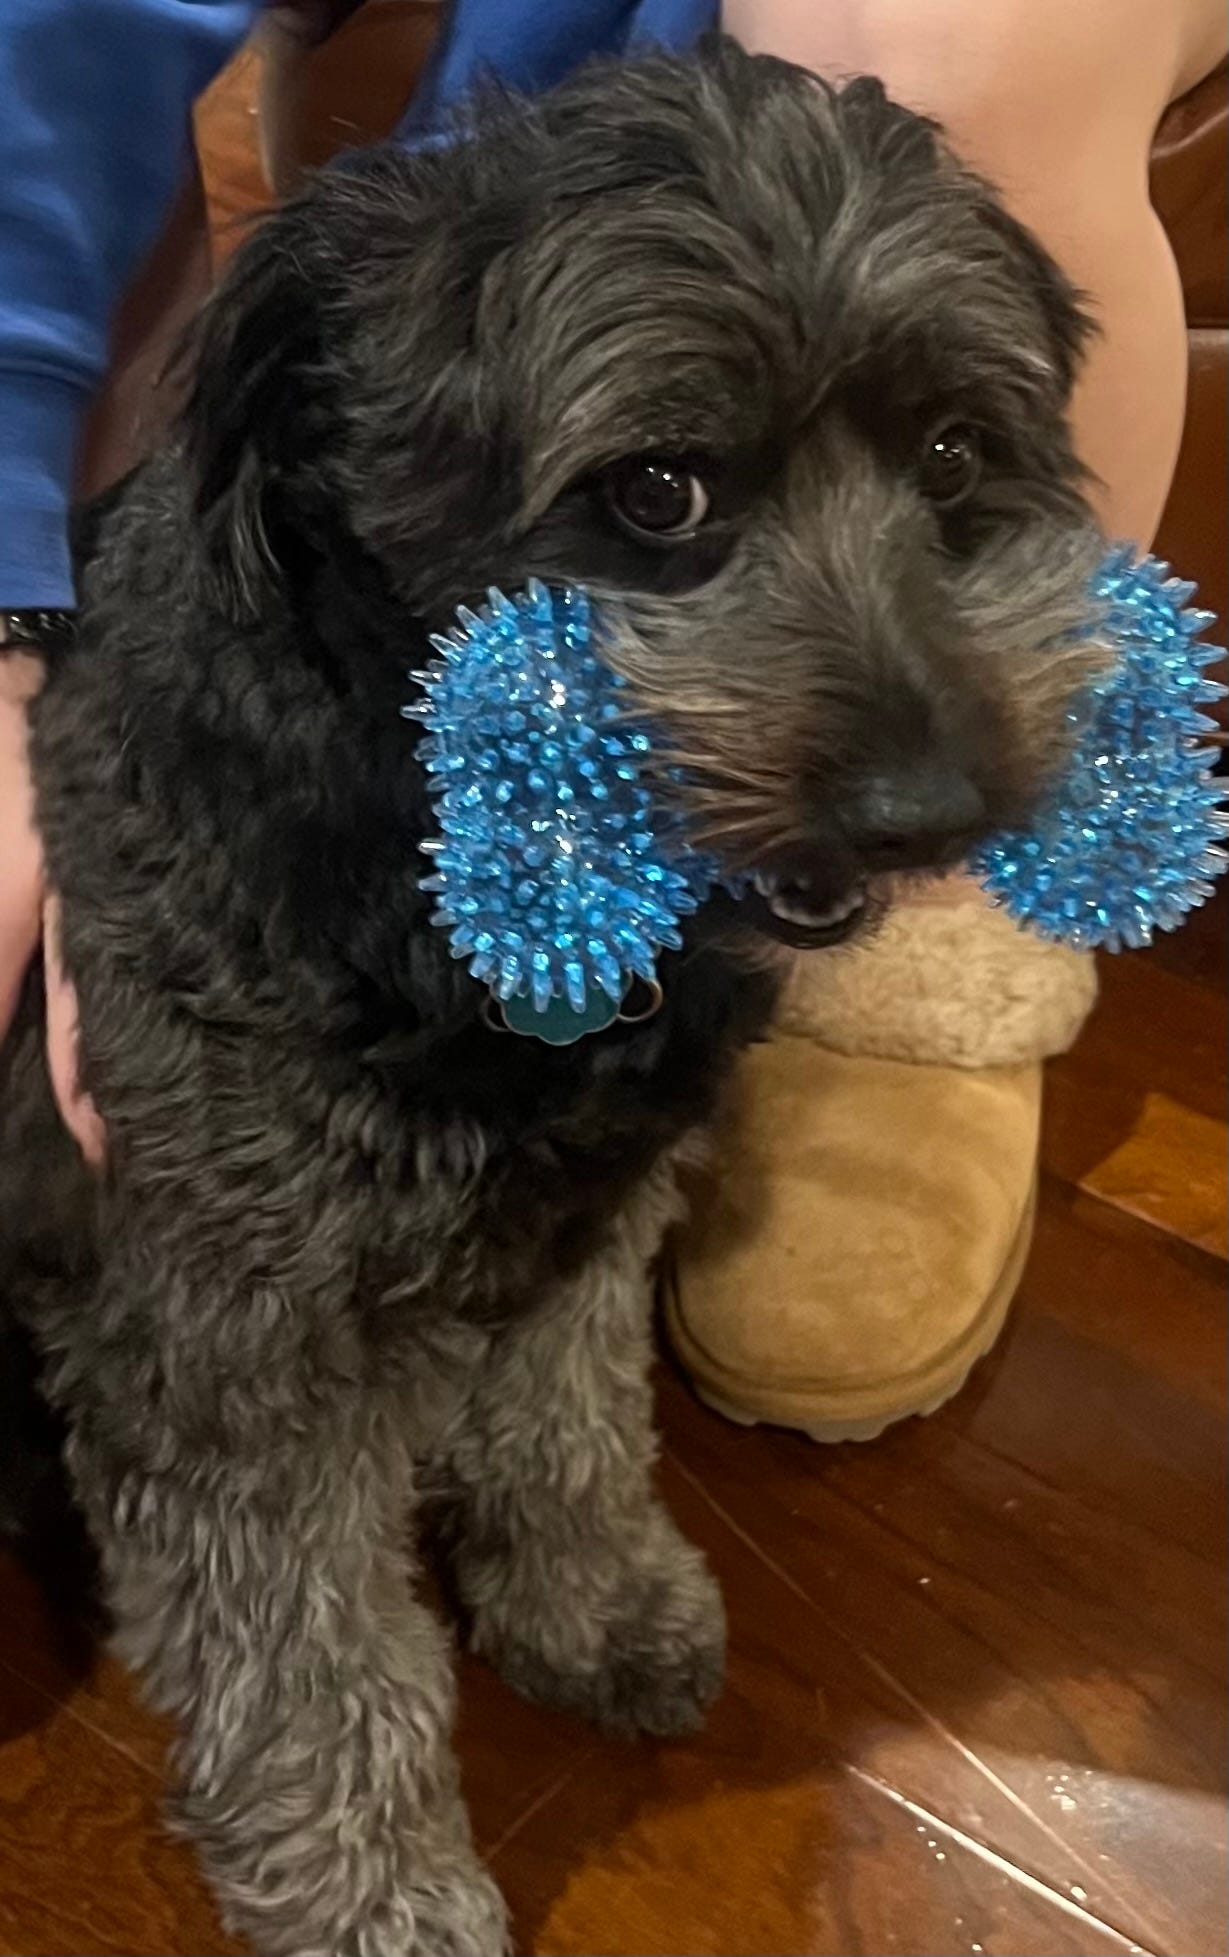 My dog with holding her blue toy